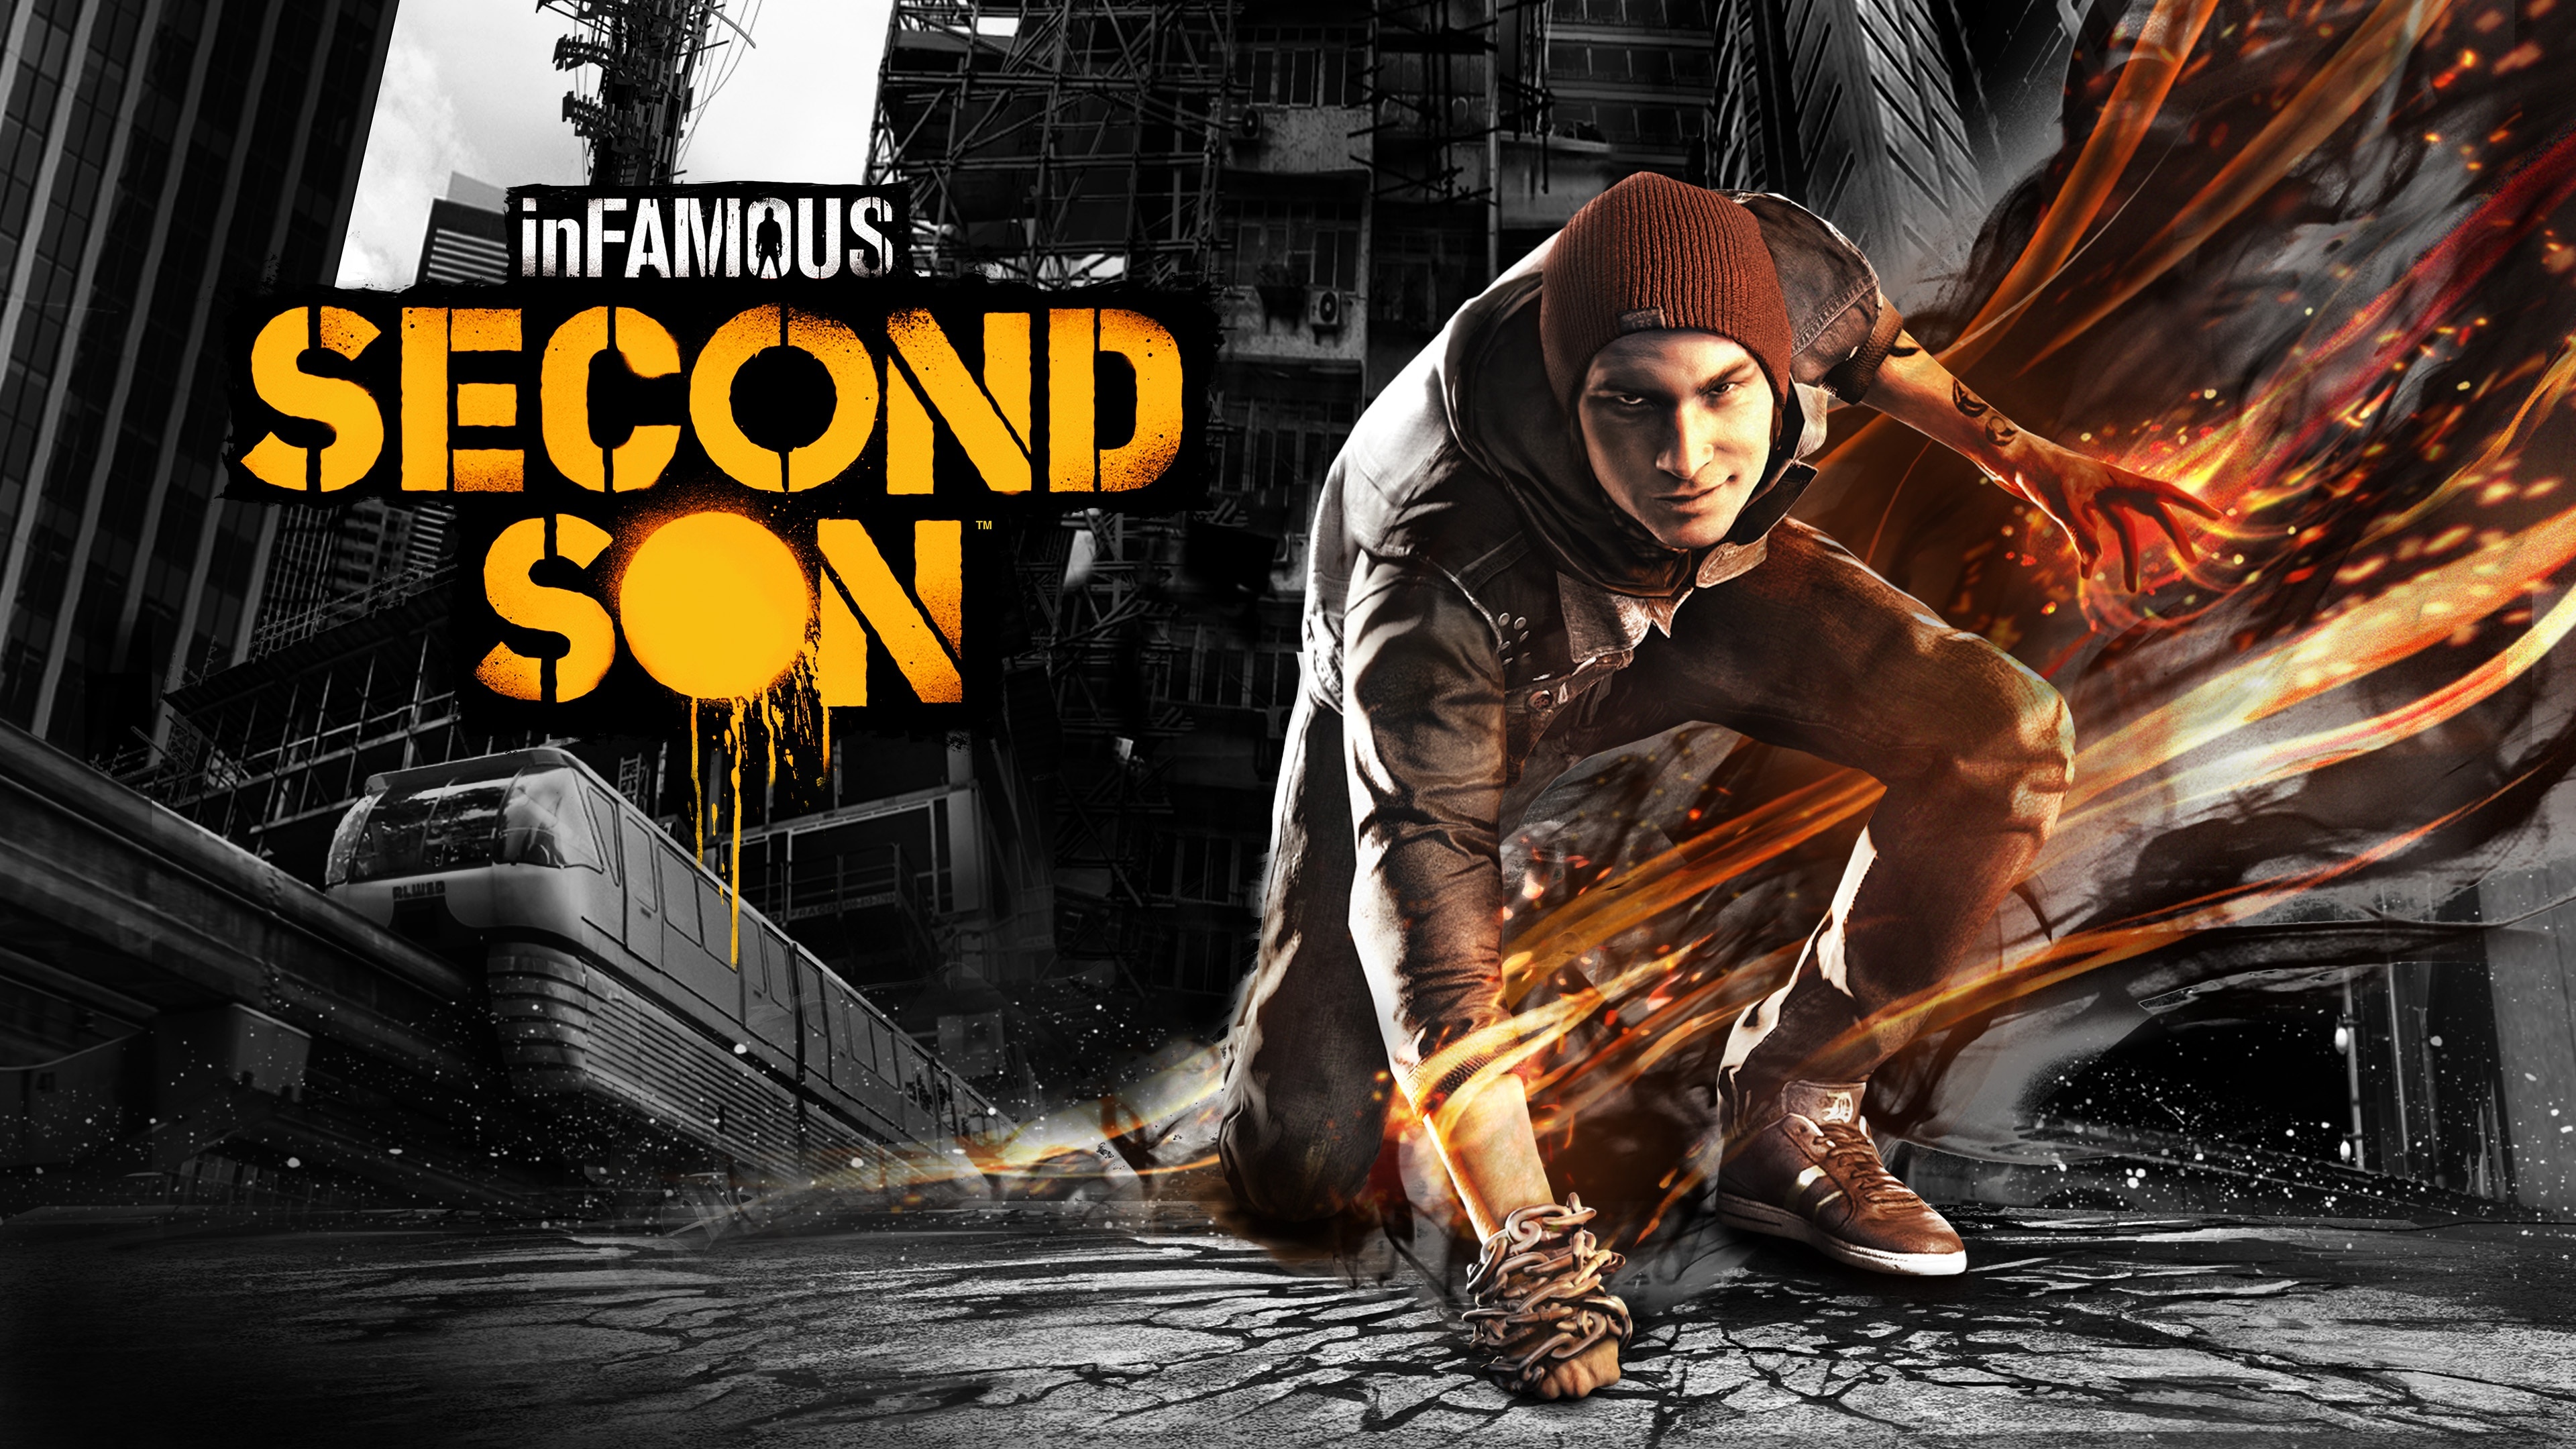 inFAMOUS: Second Son, Gaming challenge, Exciting gameplay, Action-packed adventure, 3840x2160 4K Desktop